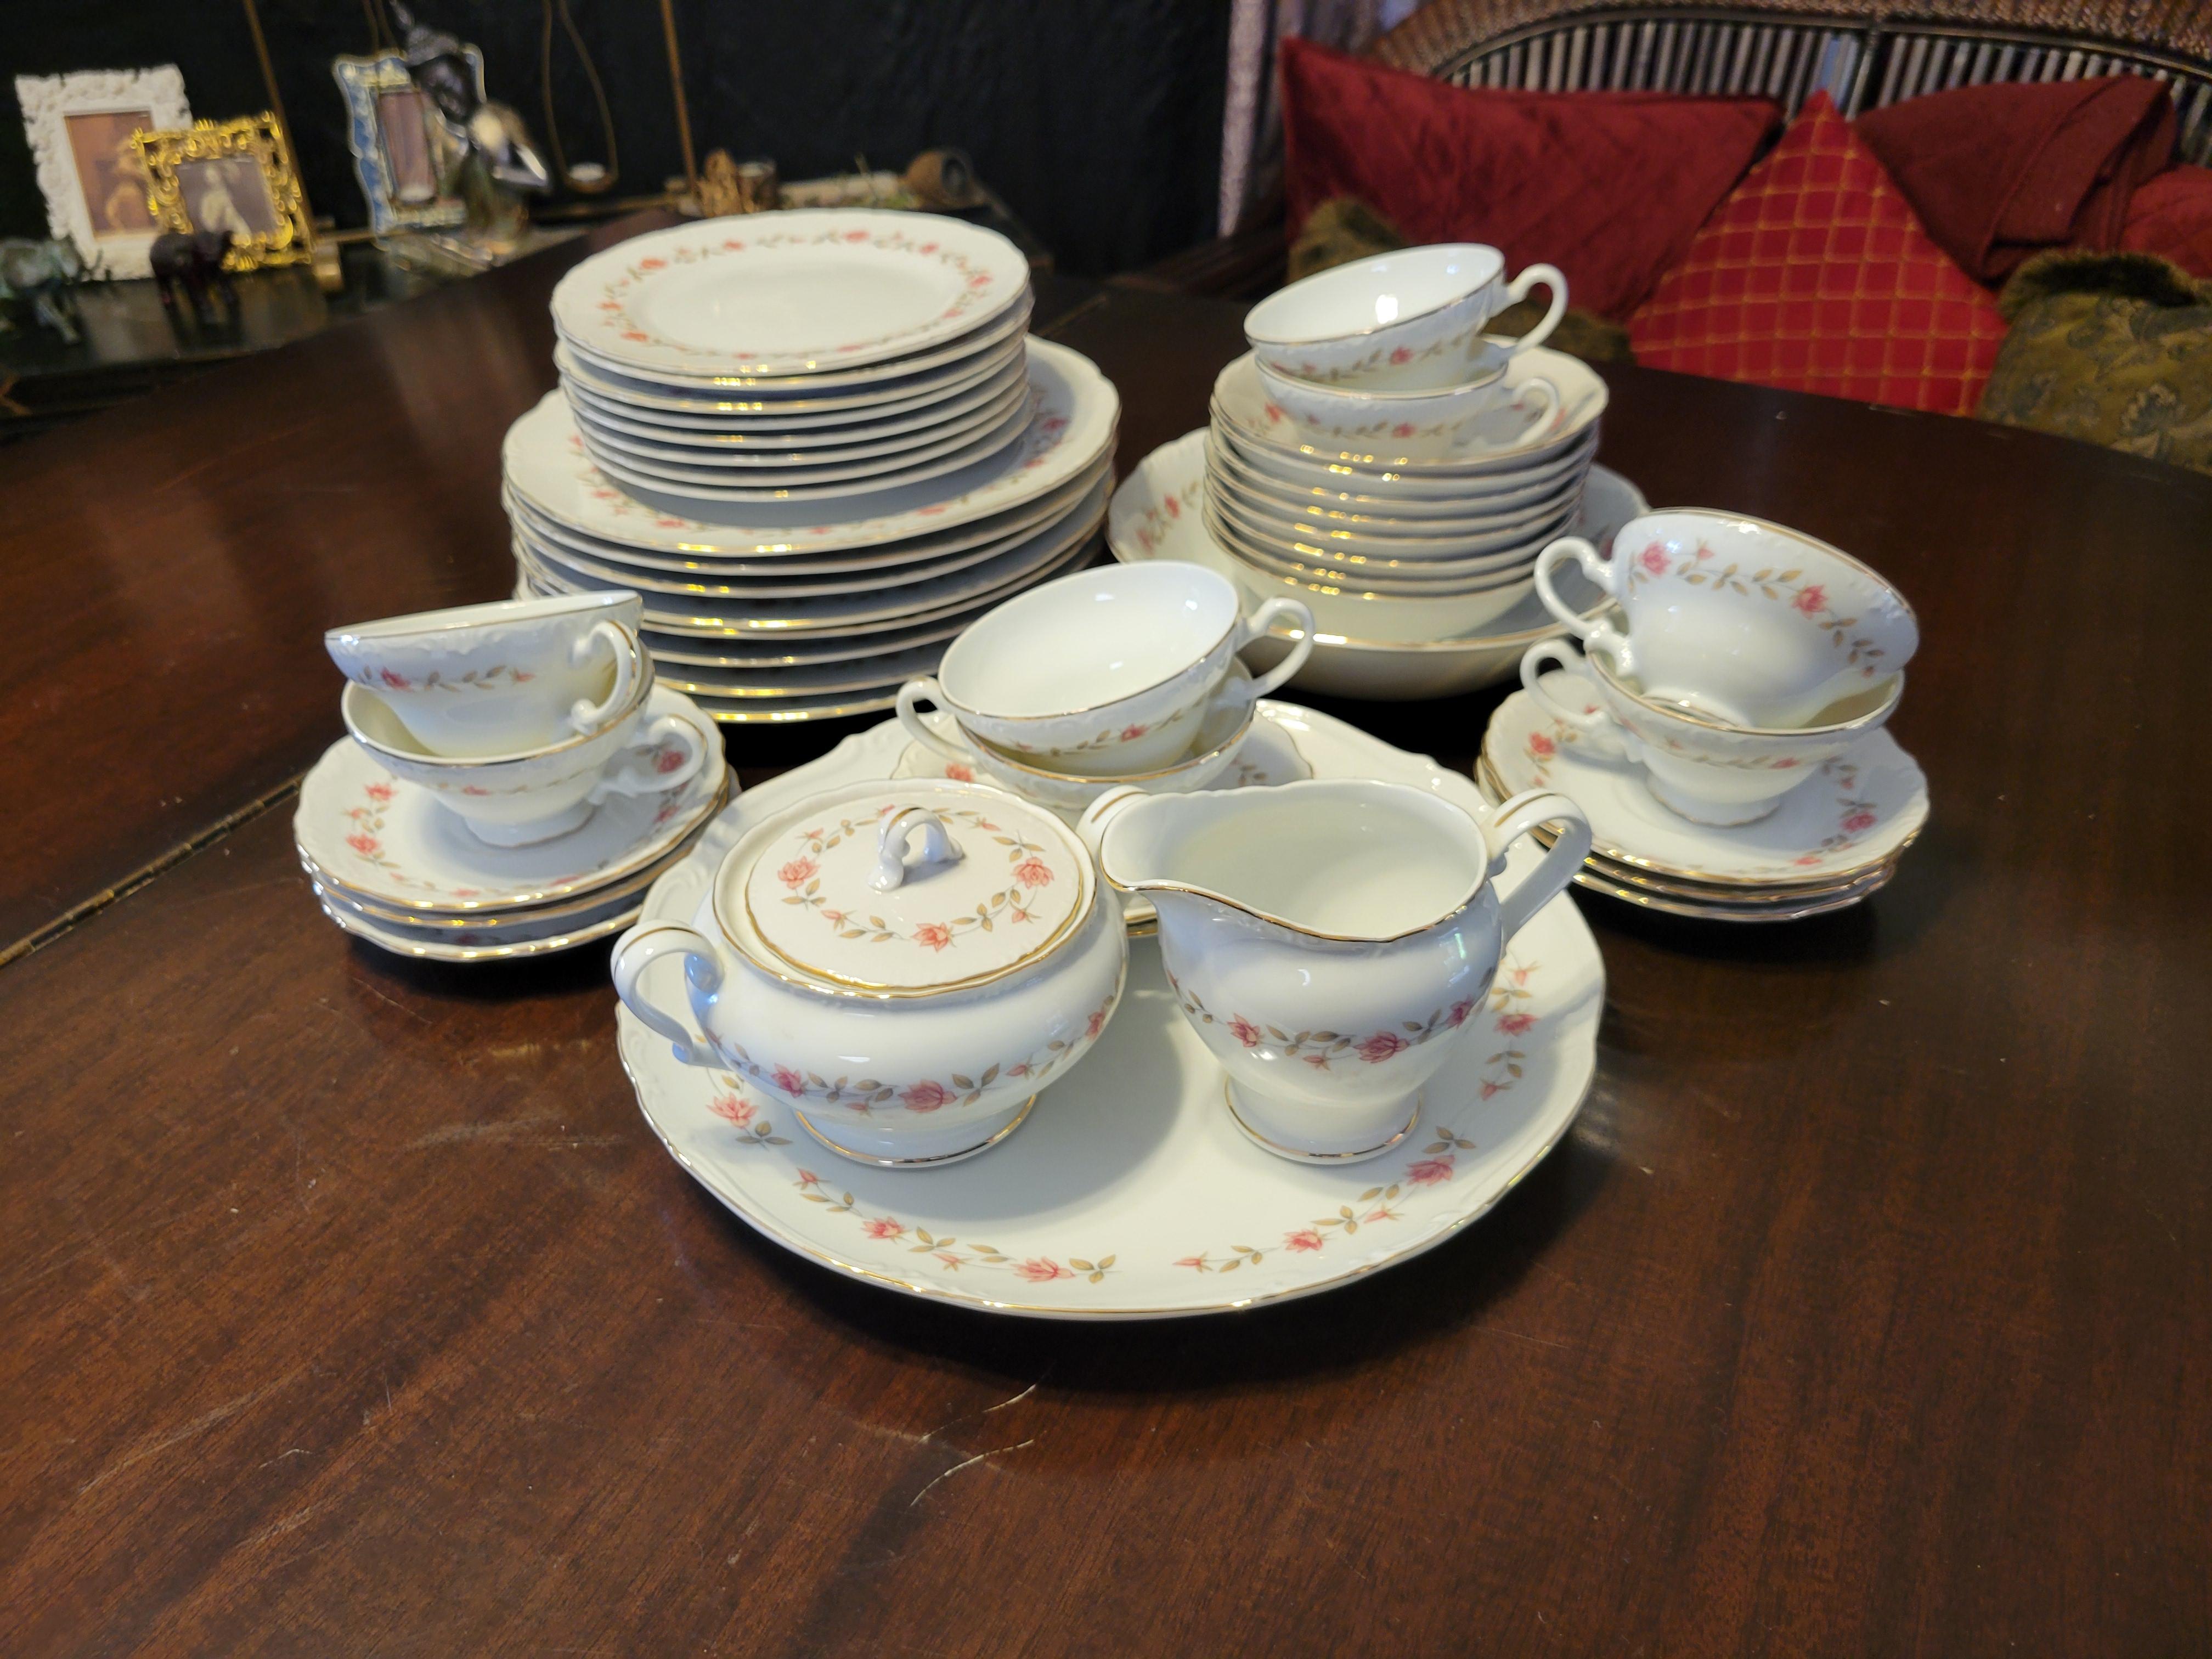 1950, Eternal Rose (Japan) Fine China 8-Person Dining Set - 44 pieces In Excellent Condition For Sale In Phoenix, AZ